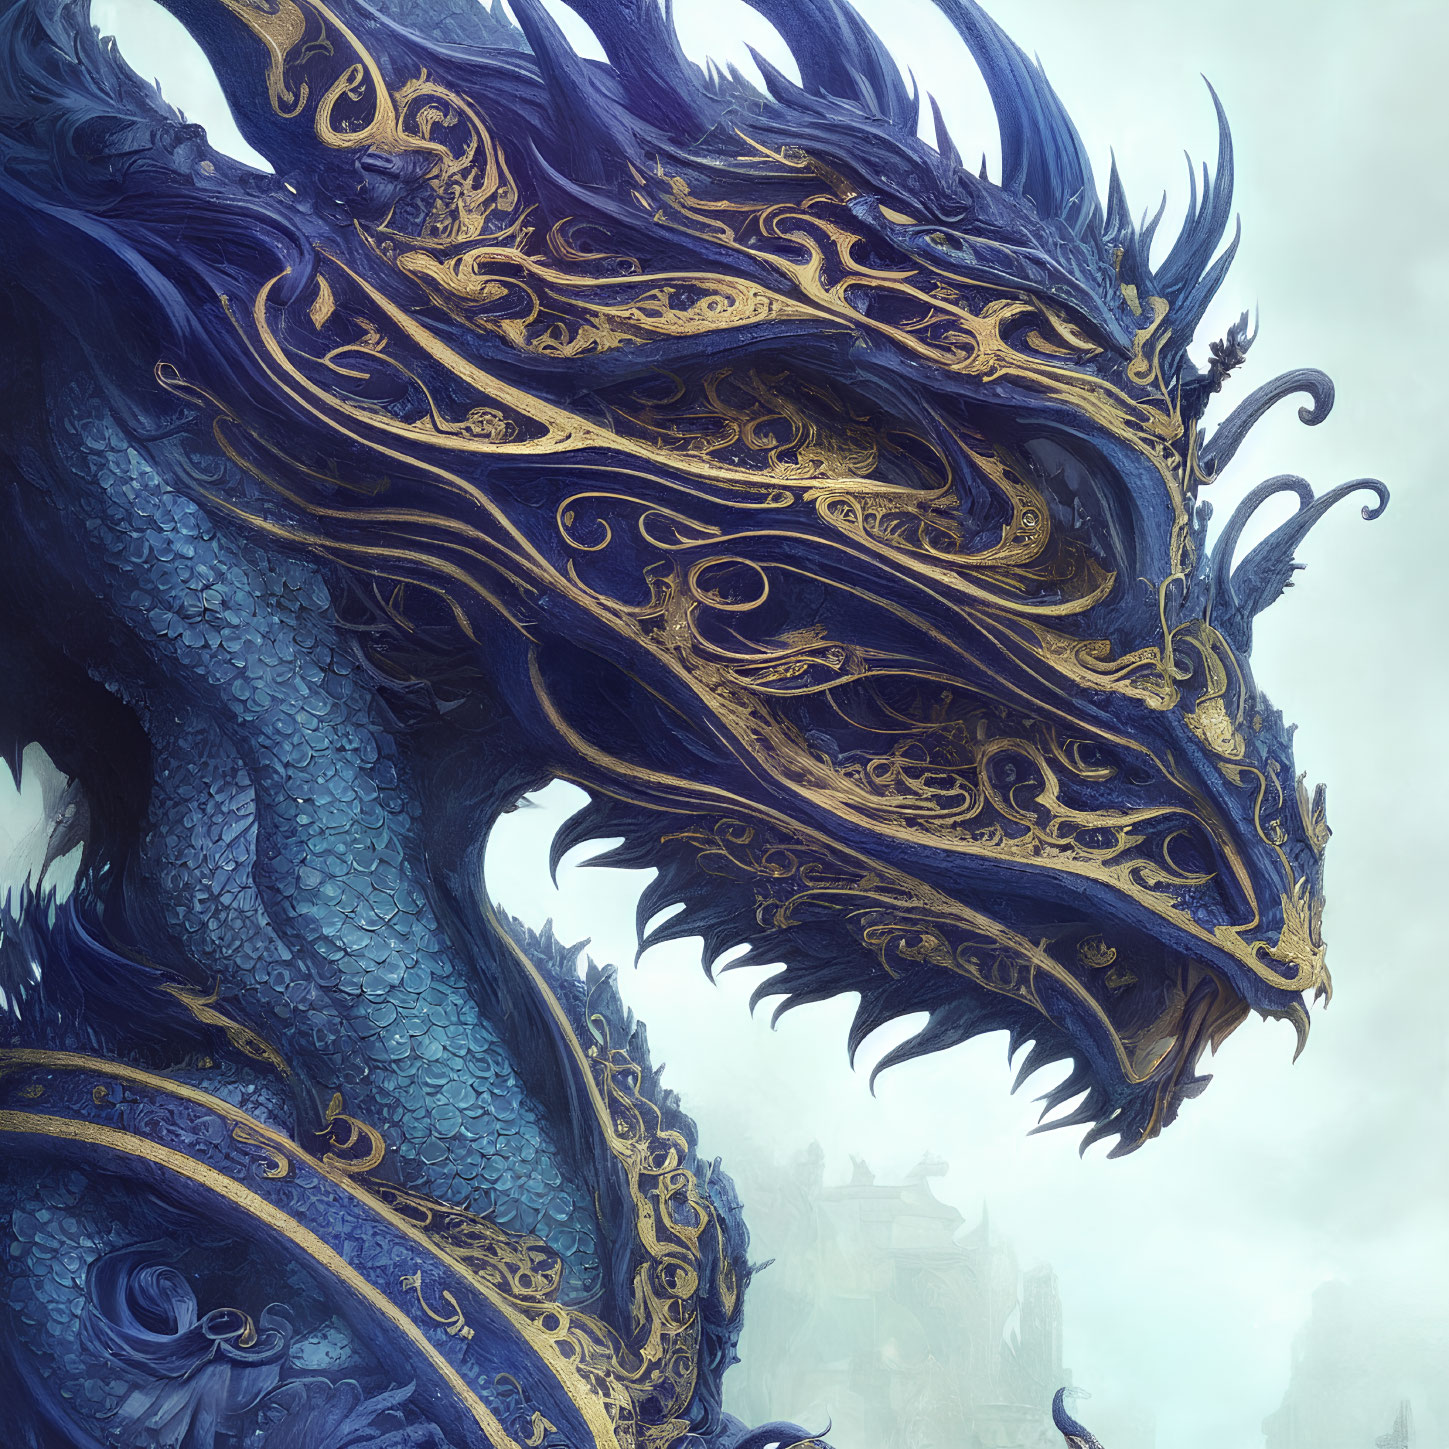 Blue dragon with golden accents in misty castle background